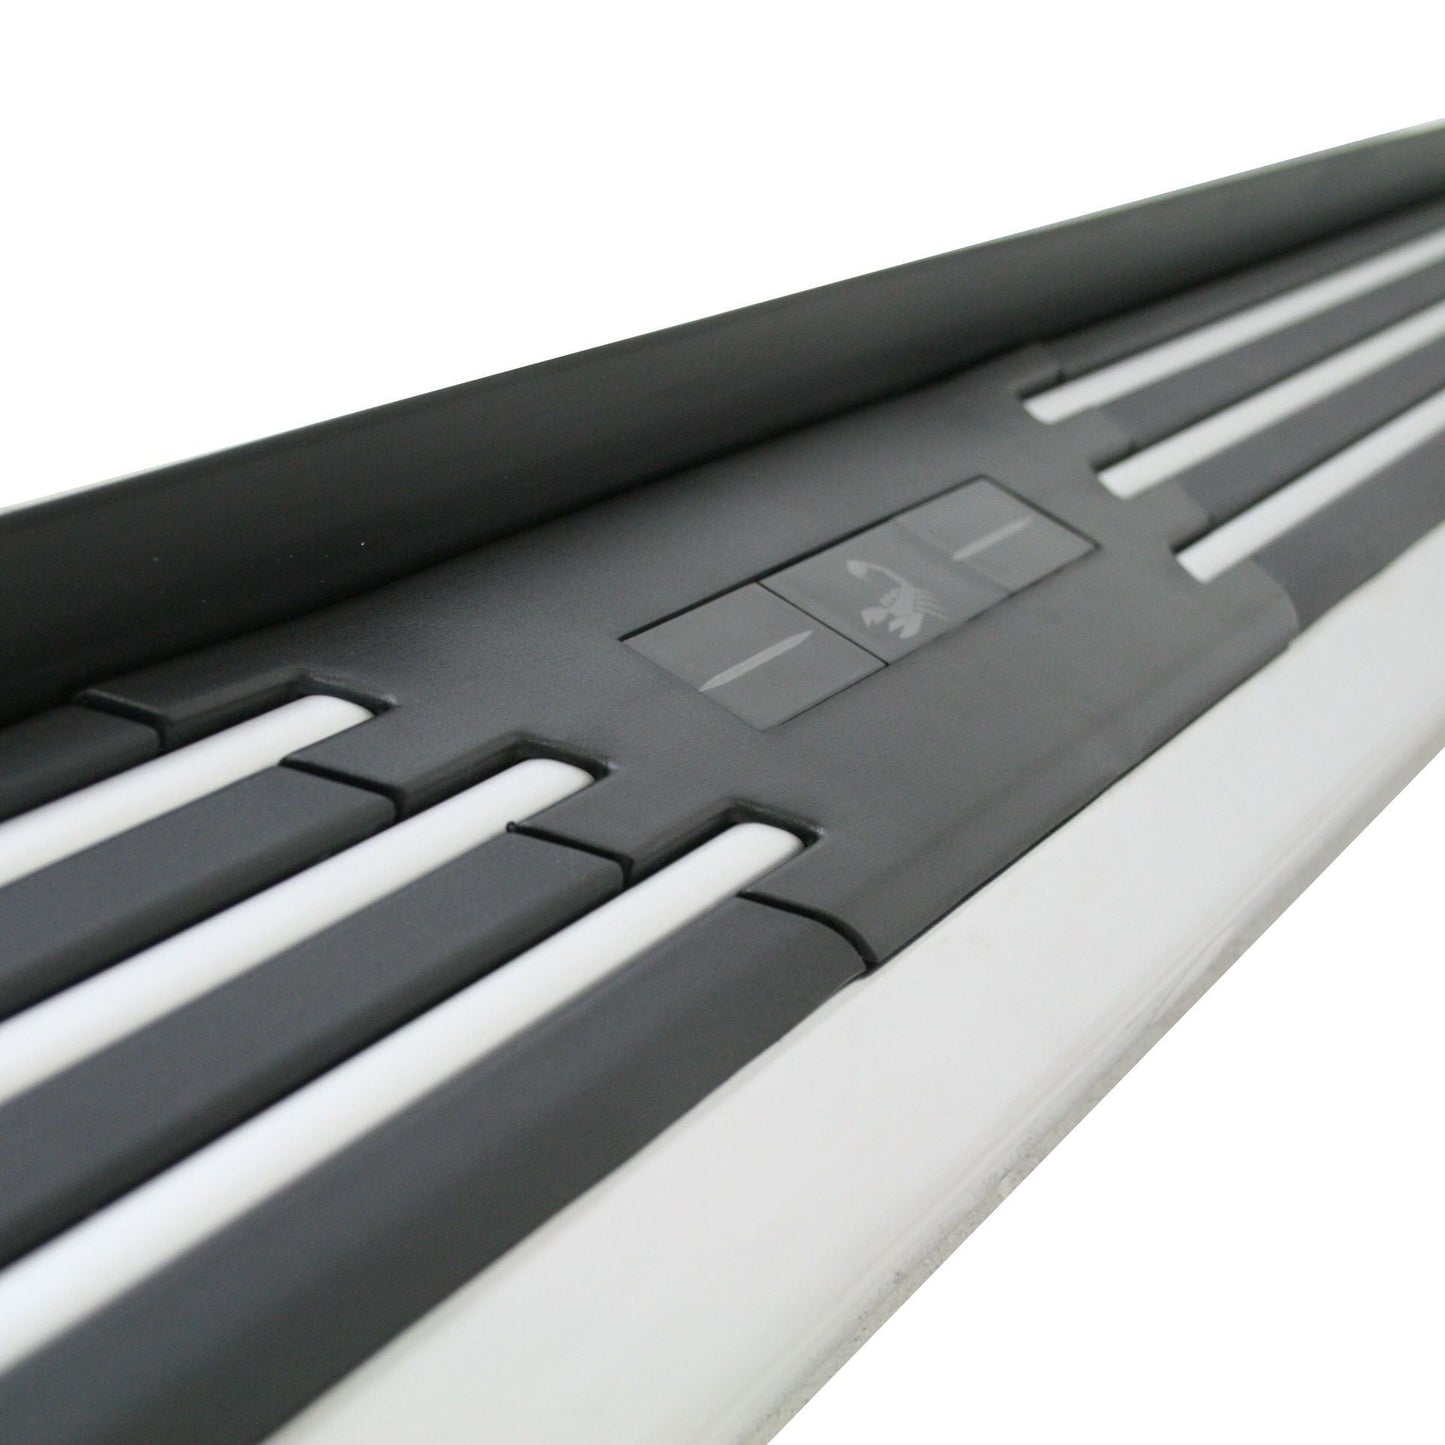 Premier Side Steps Running Boards for Audi Q7 2020+ -  - sold by Direct4x4